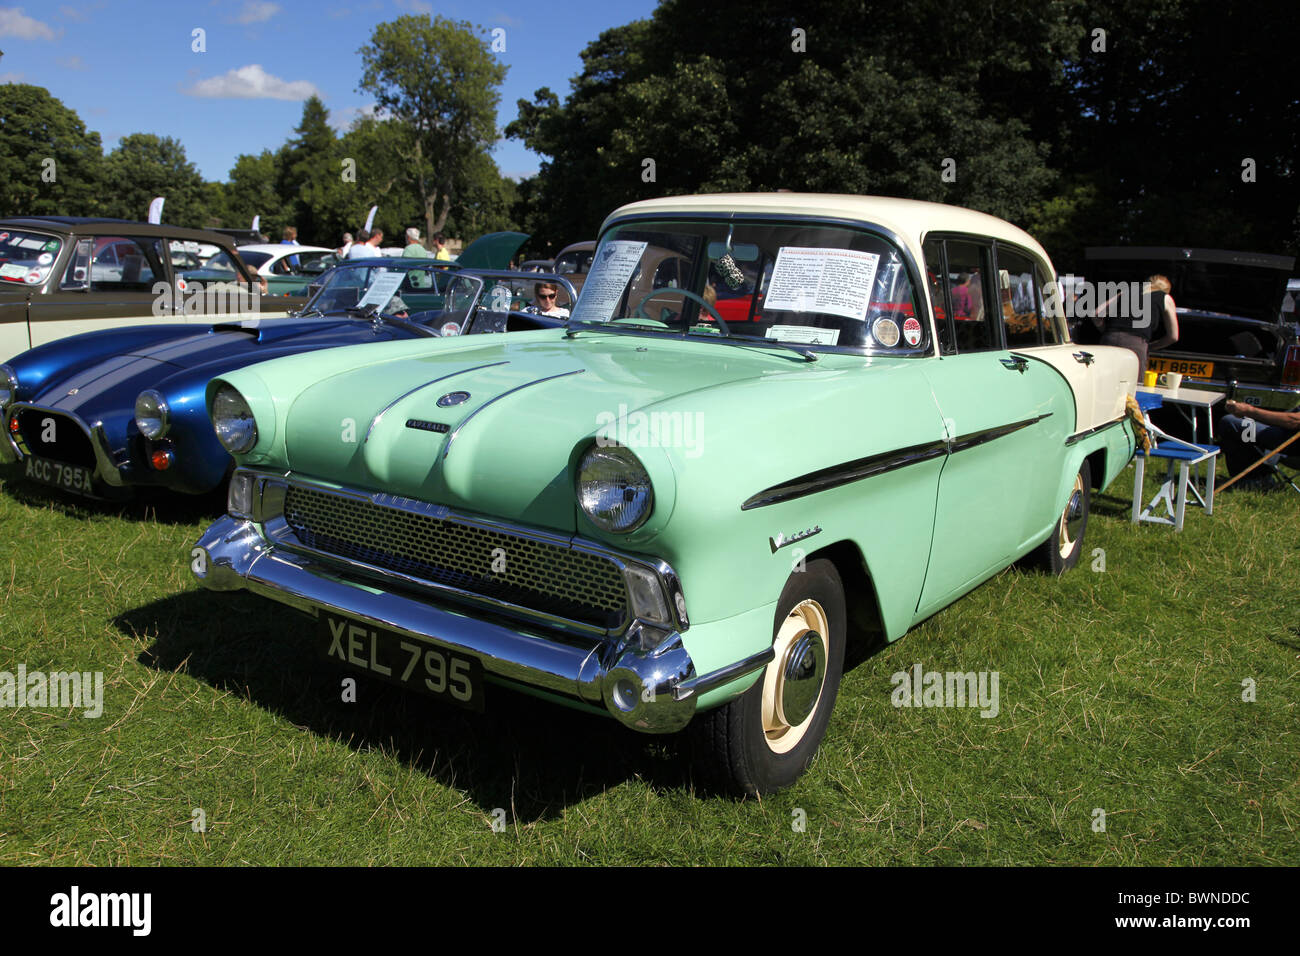 1958 VAUXHALL VICTOR SERIES I STAINDROP YORKSHIRE RABY CASTLE STAINDROP NORTH YORKSHIRE STAINDROP NORTH YORKSHIRE 22 August 2 Stock Photo